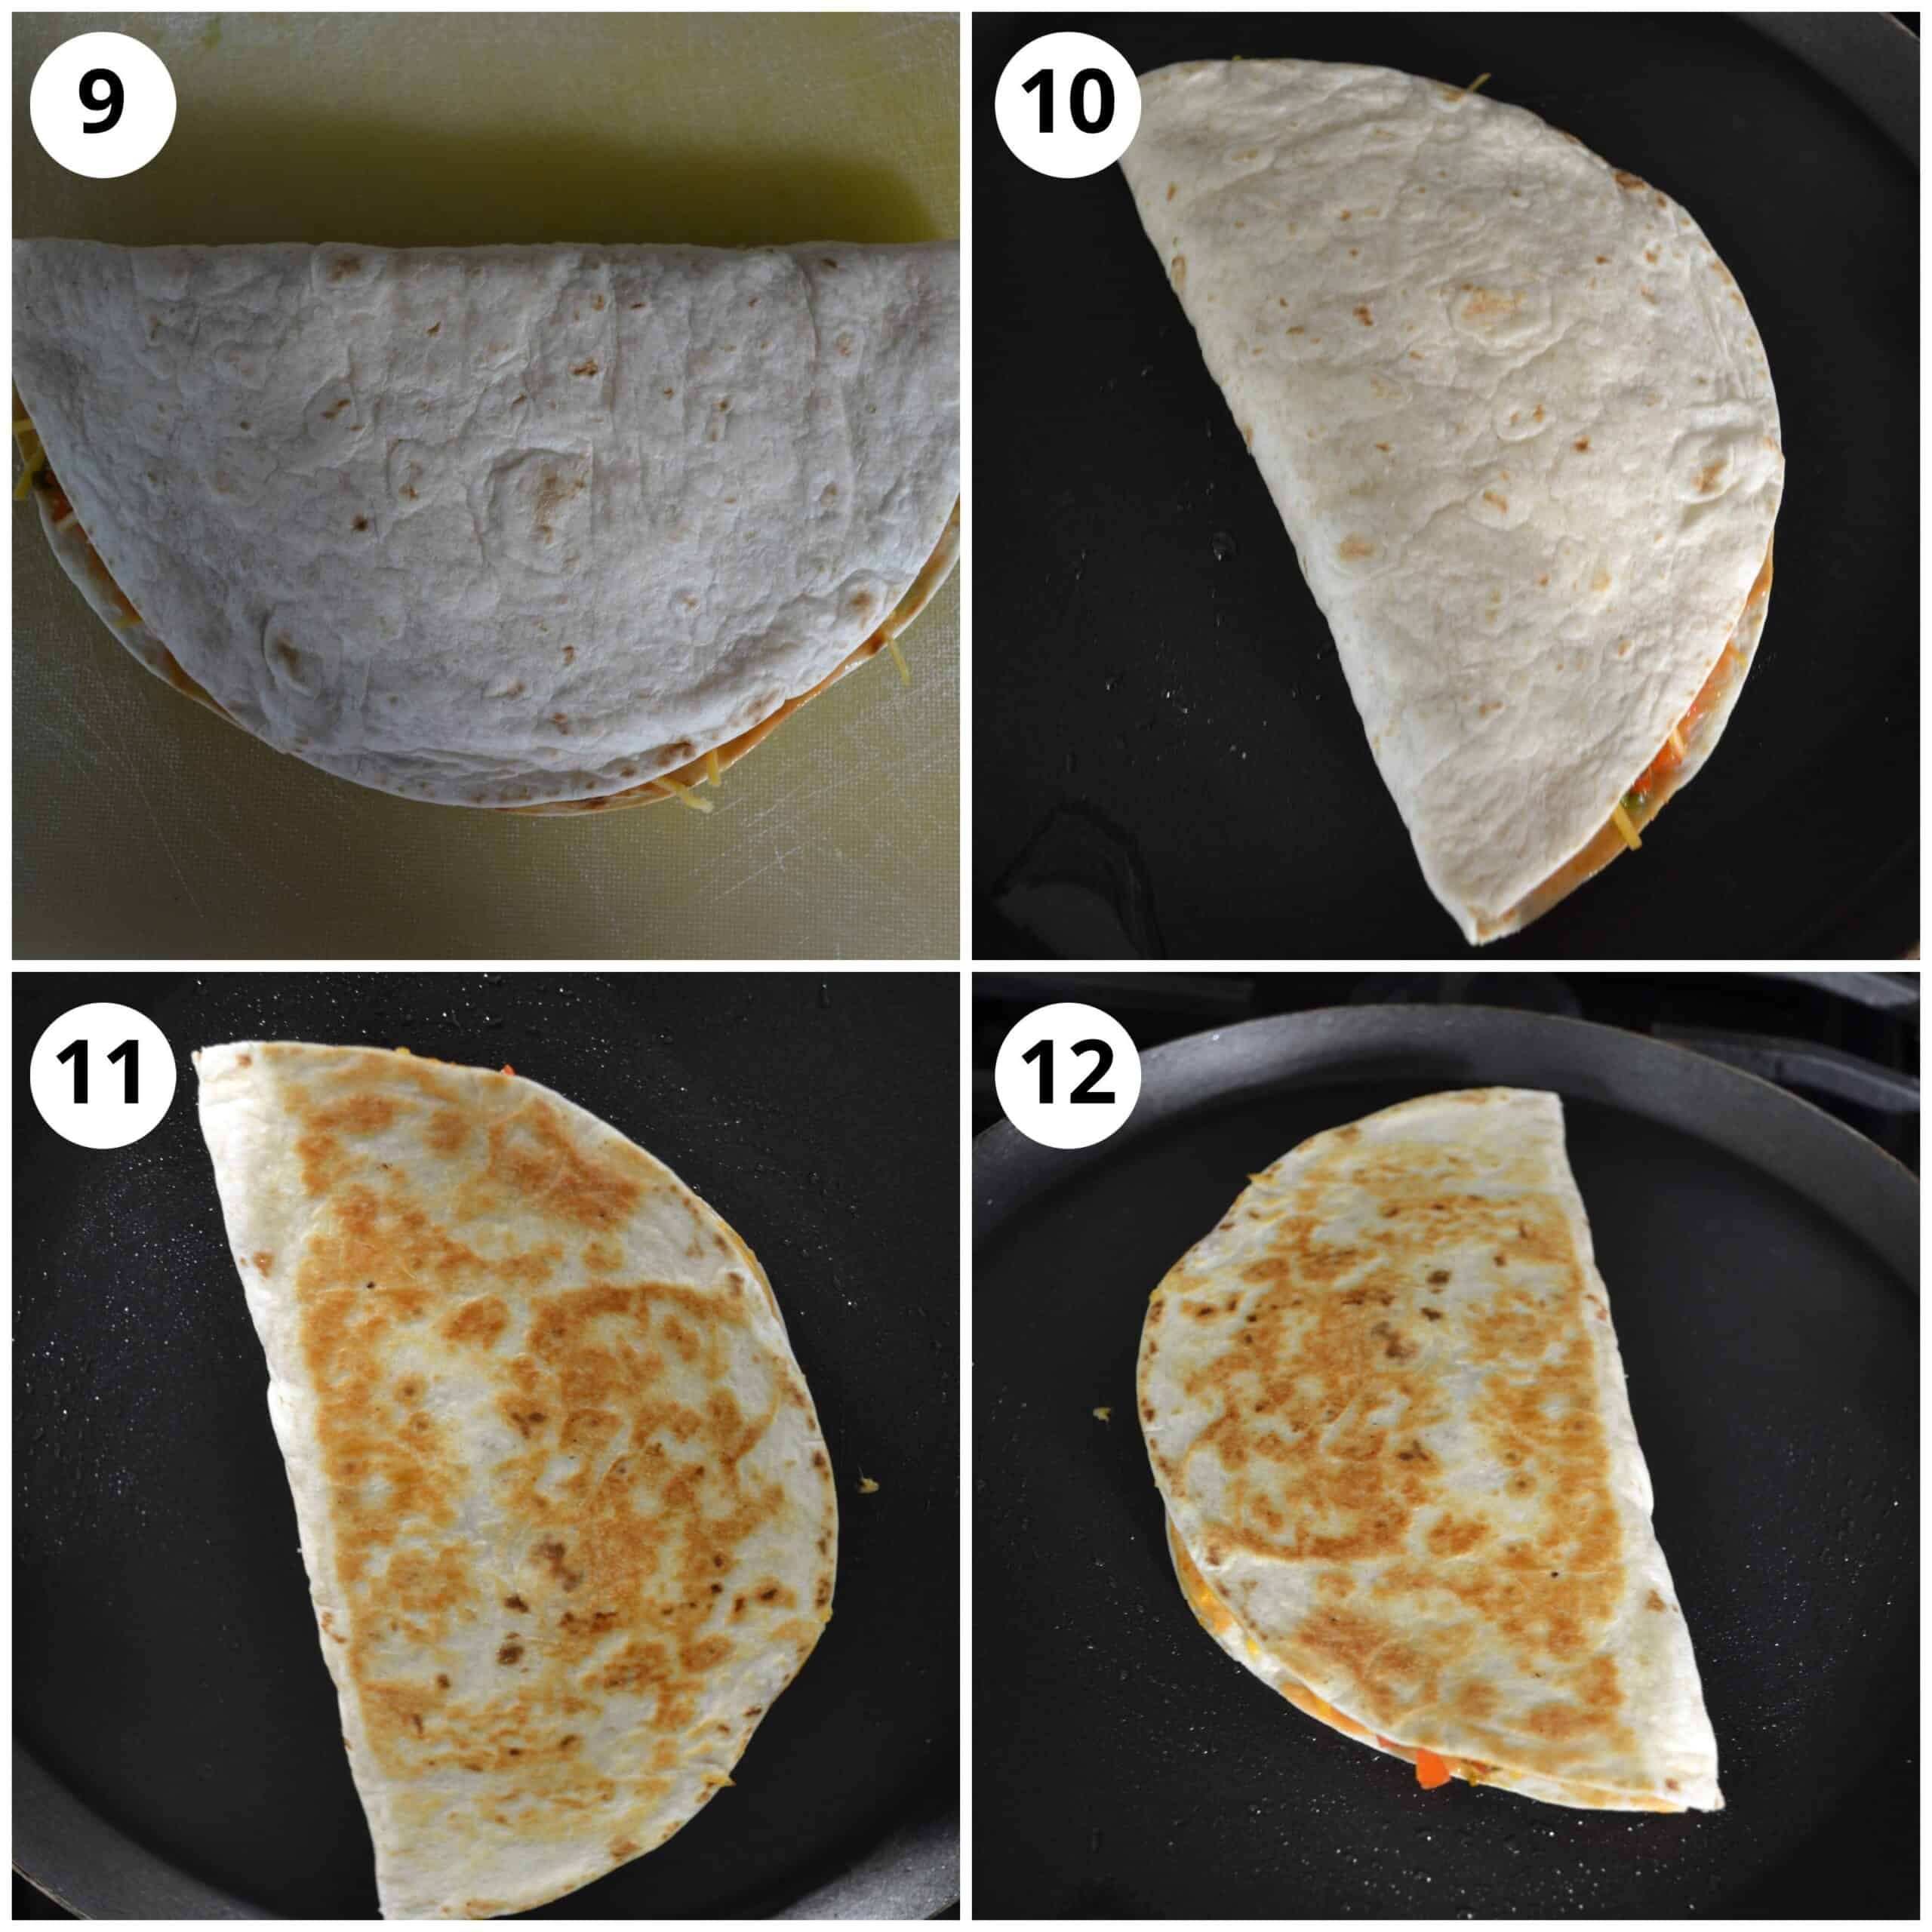 Photos to show how to fold and cook the quesadillas